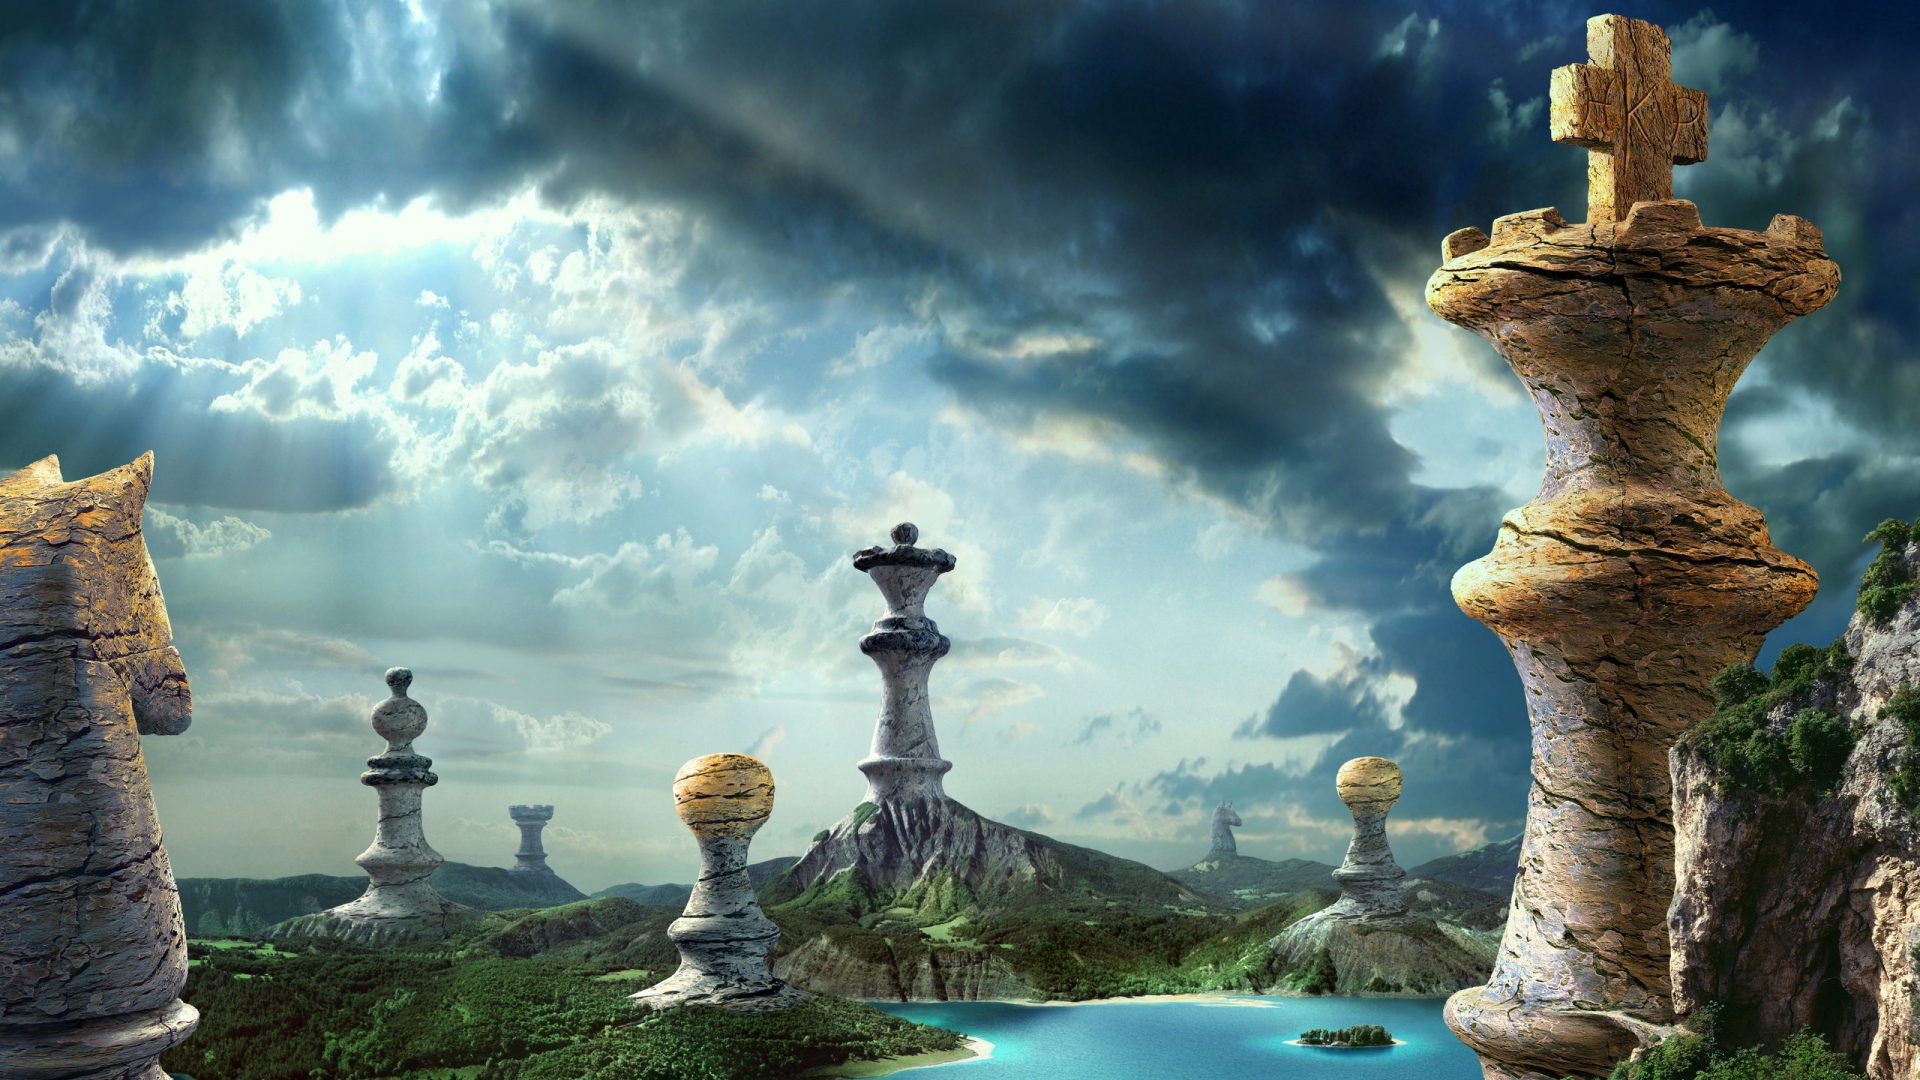 Fantasy Chess Pieces for 1920 x 1080 HDTV 1080p resolution